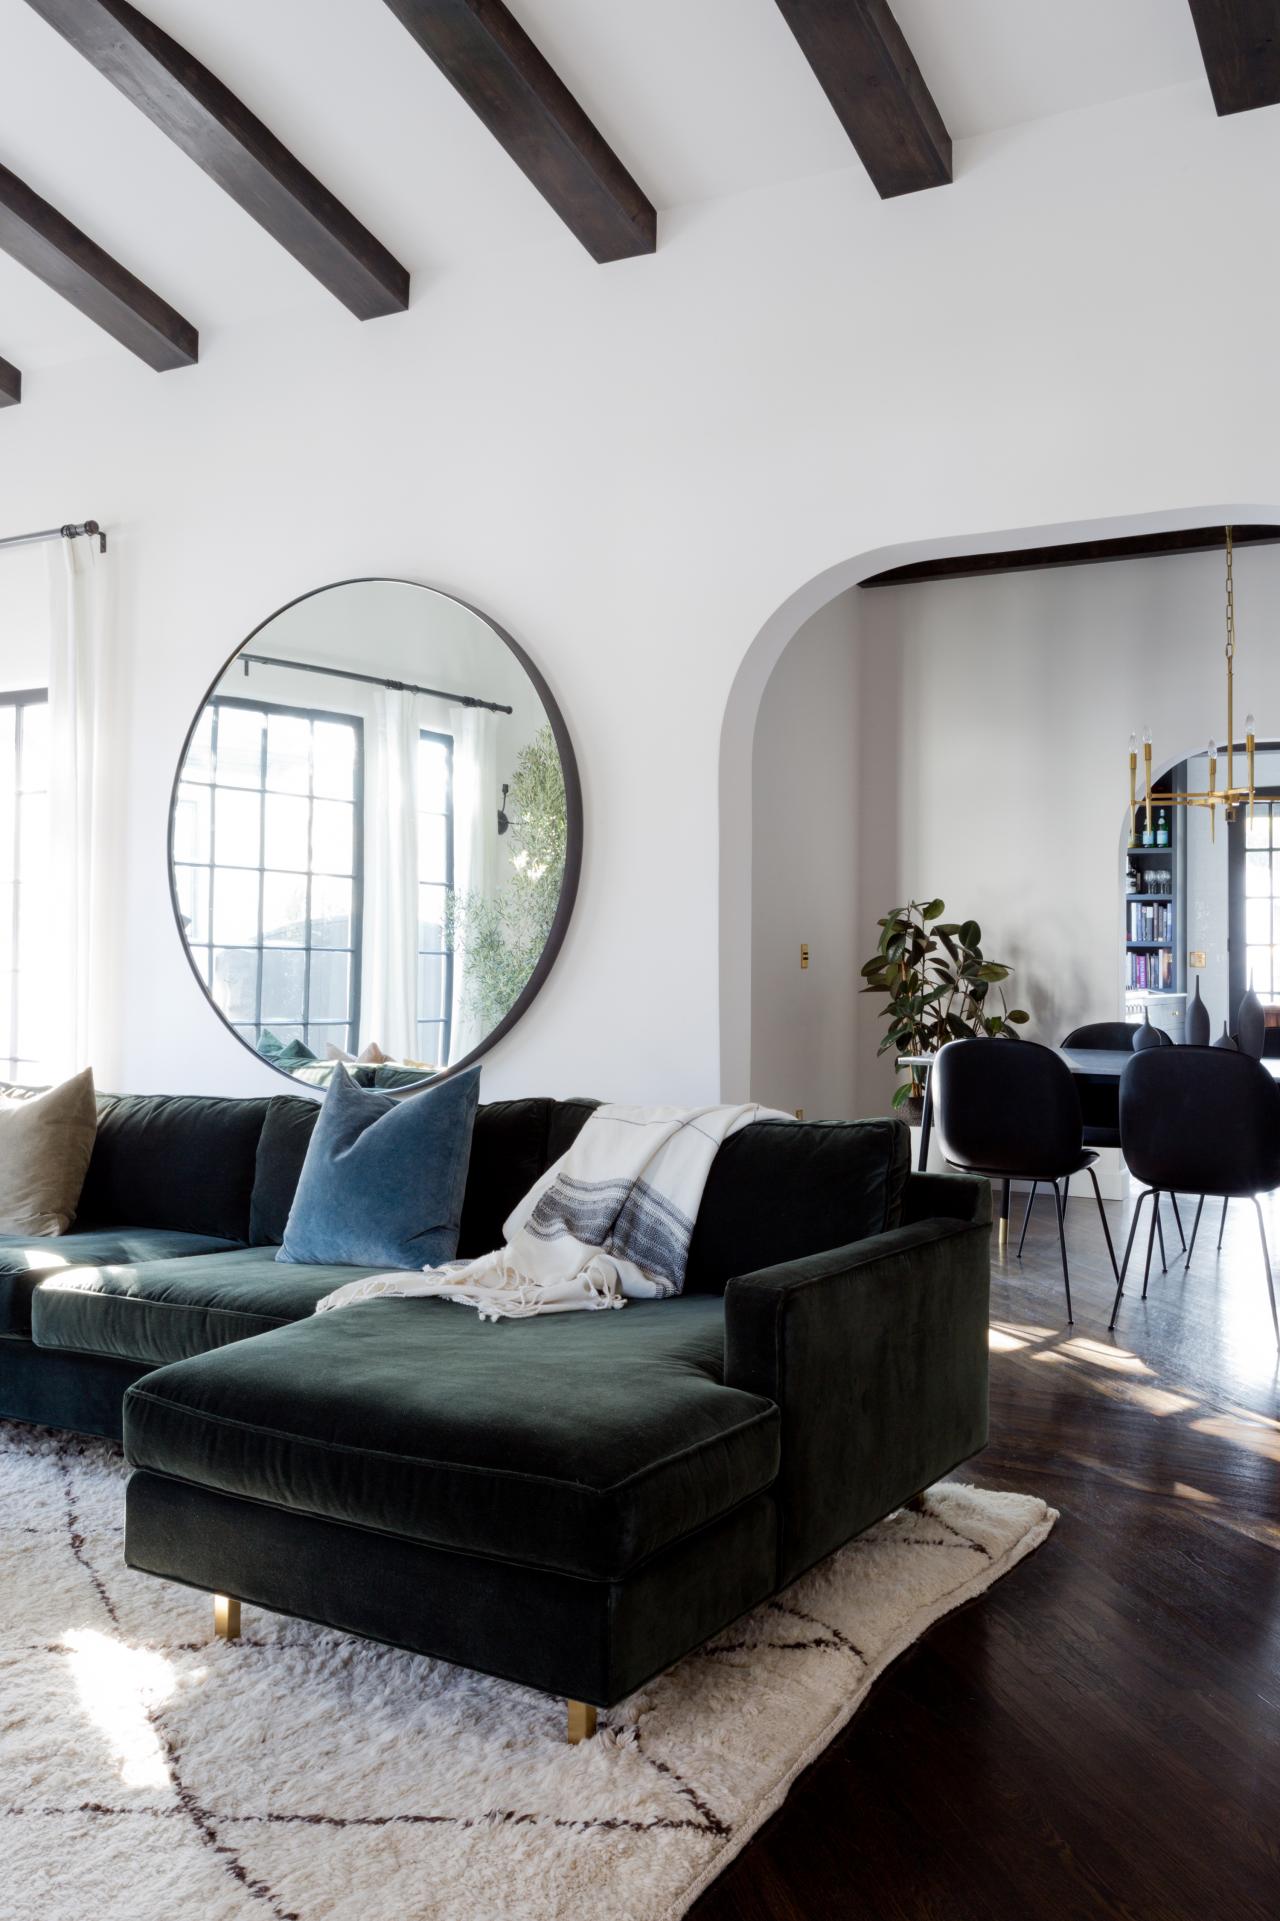 15 Ways to Use a Round Mirror in Your Home